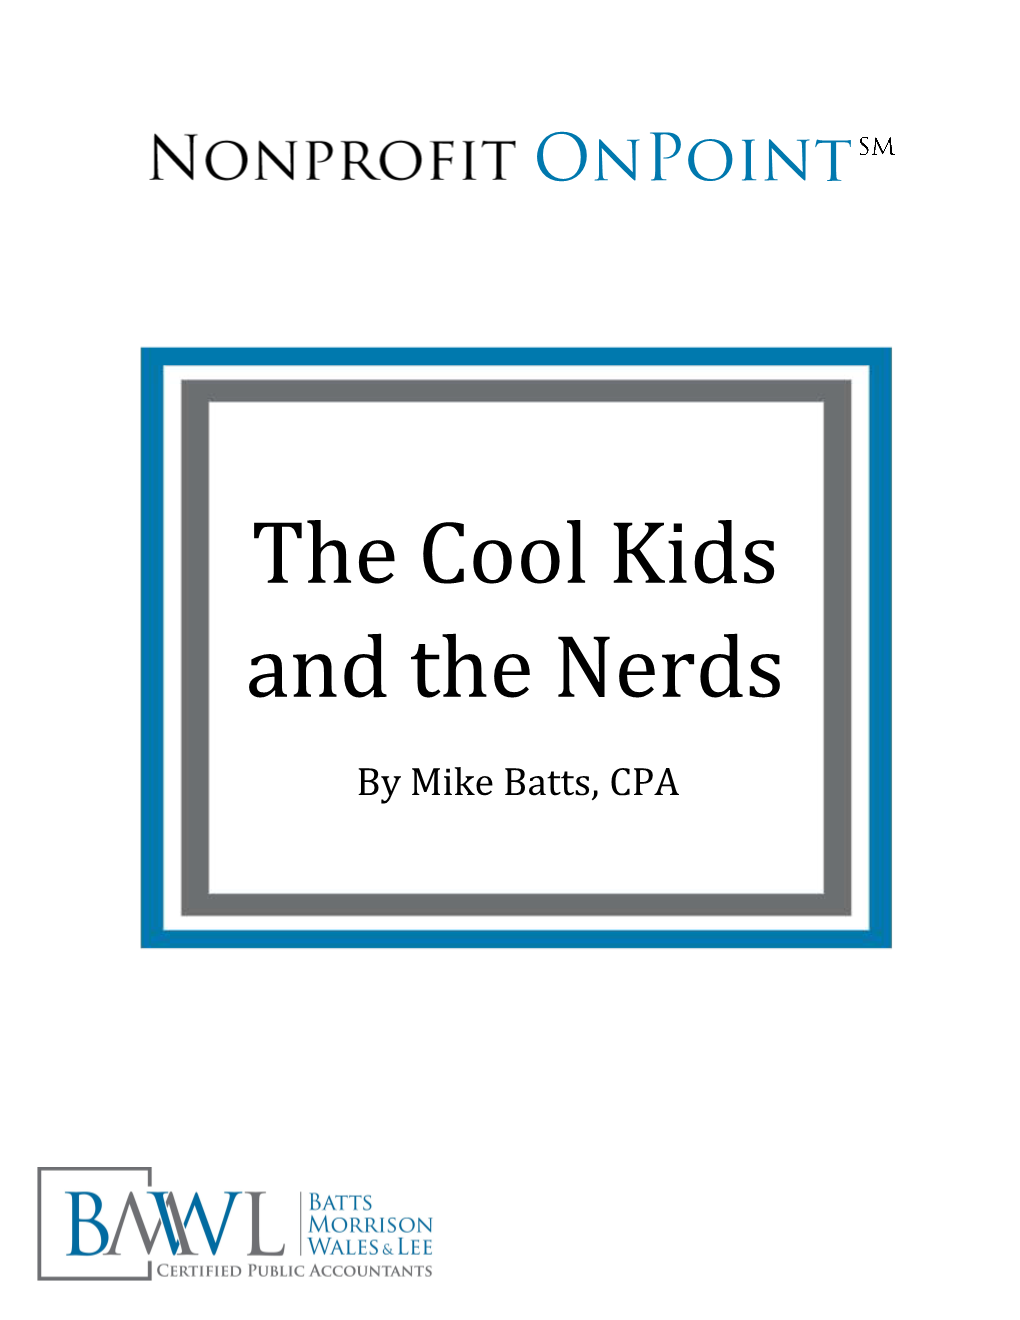 The Cool Kids and the Nerds How Working Together Can Save the World by Mike Batts, CPA